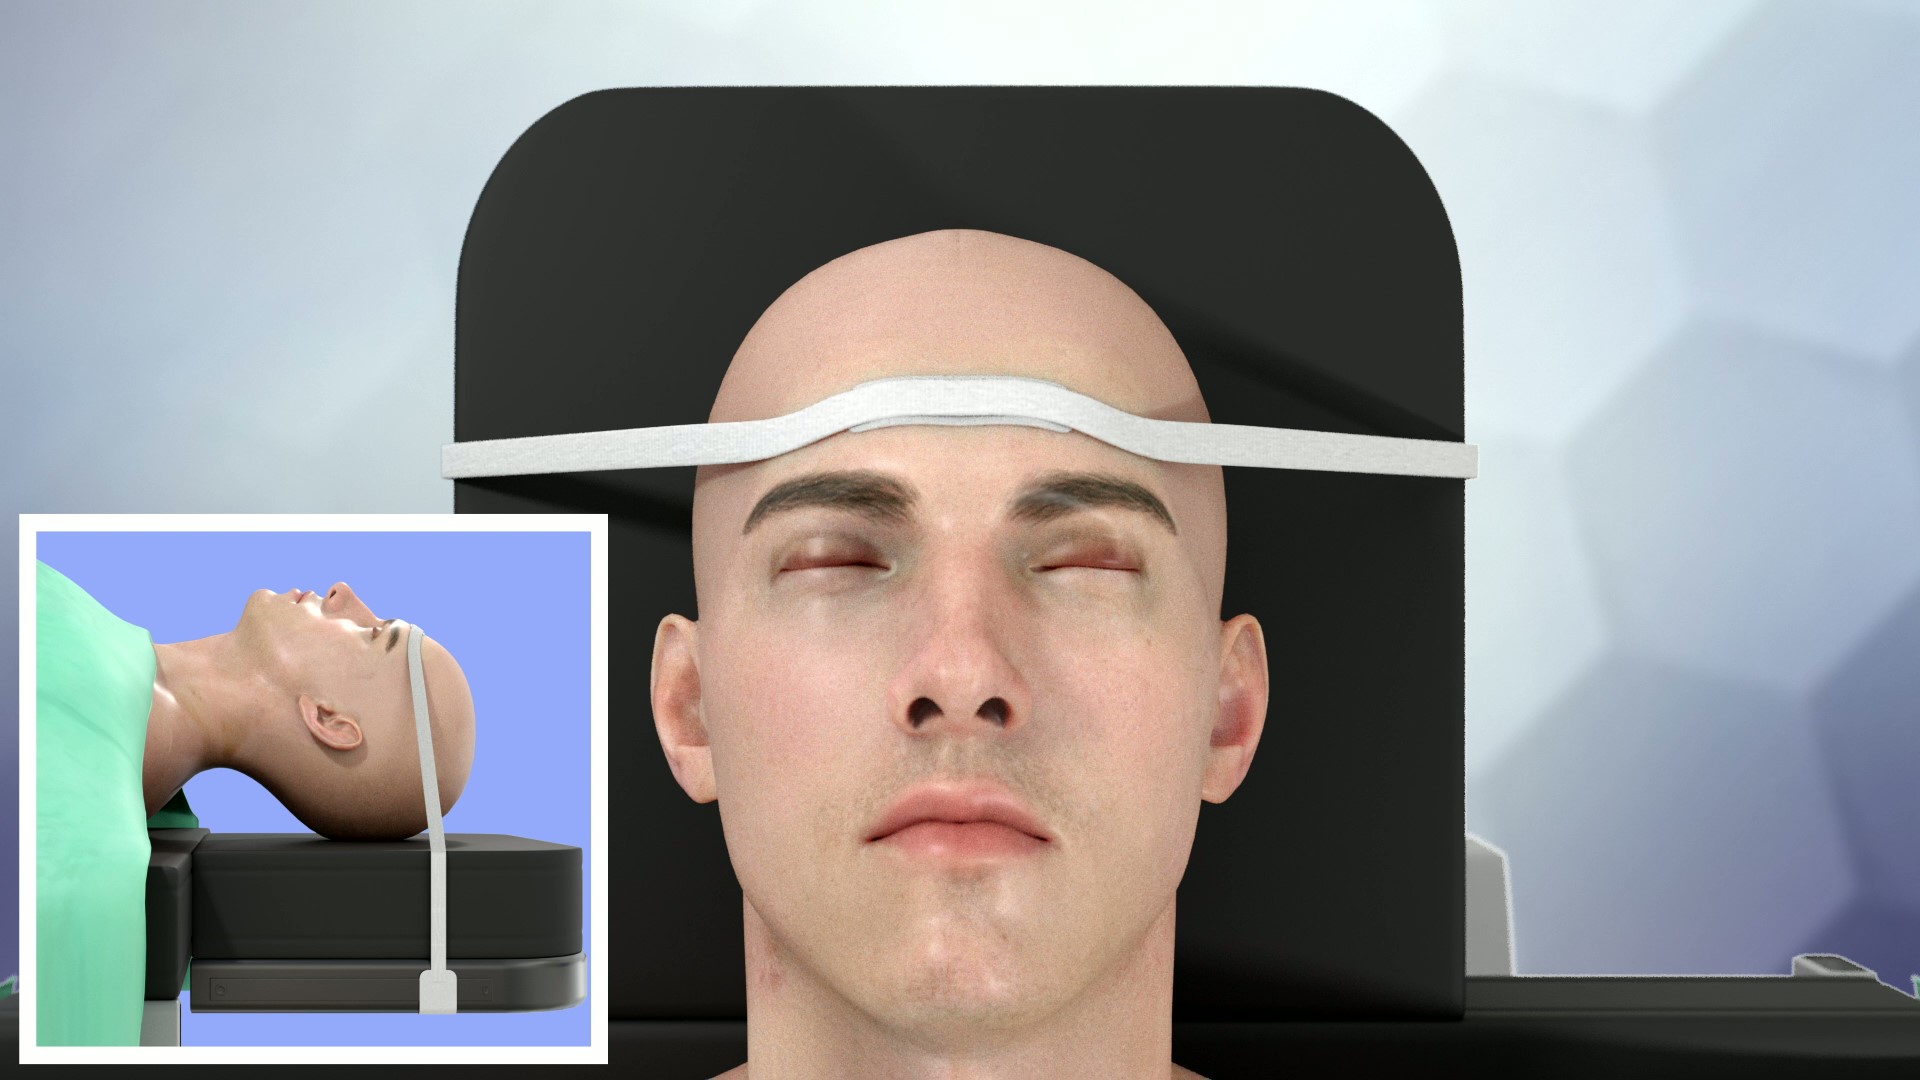 Cranial Immobilization System Application